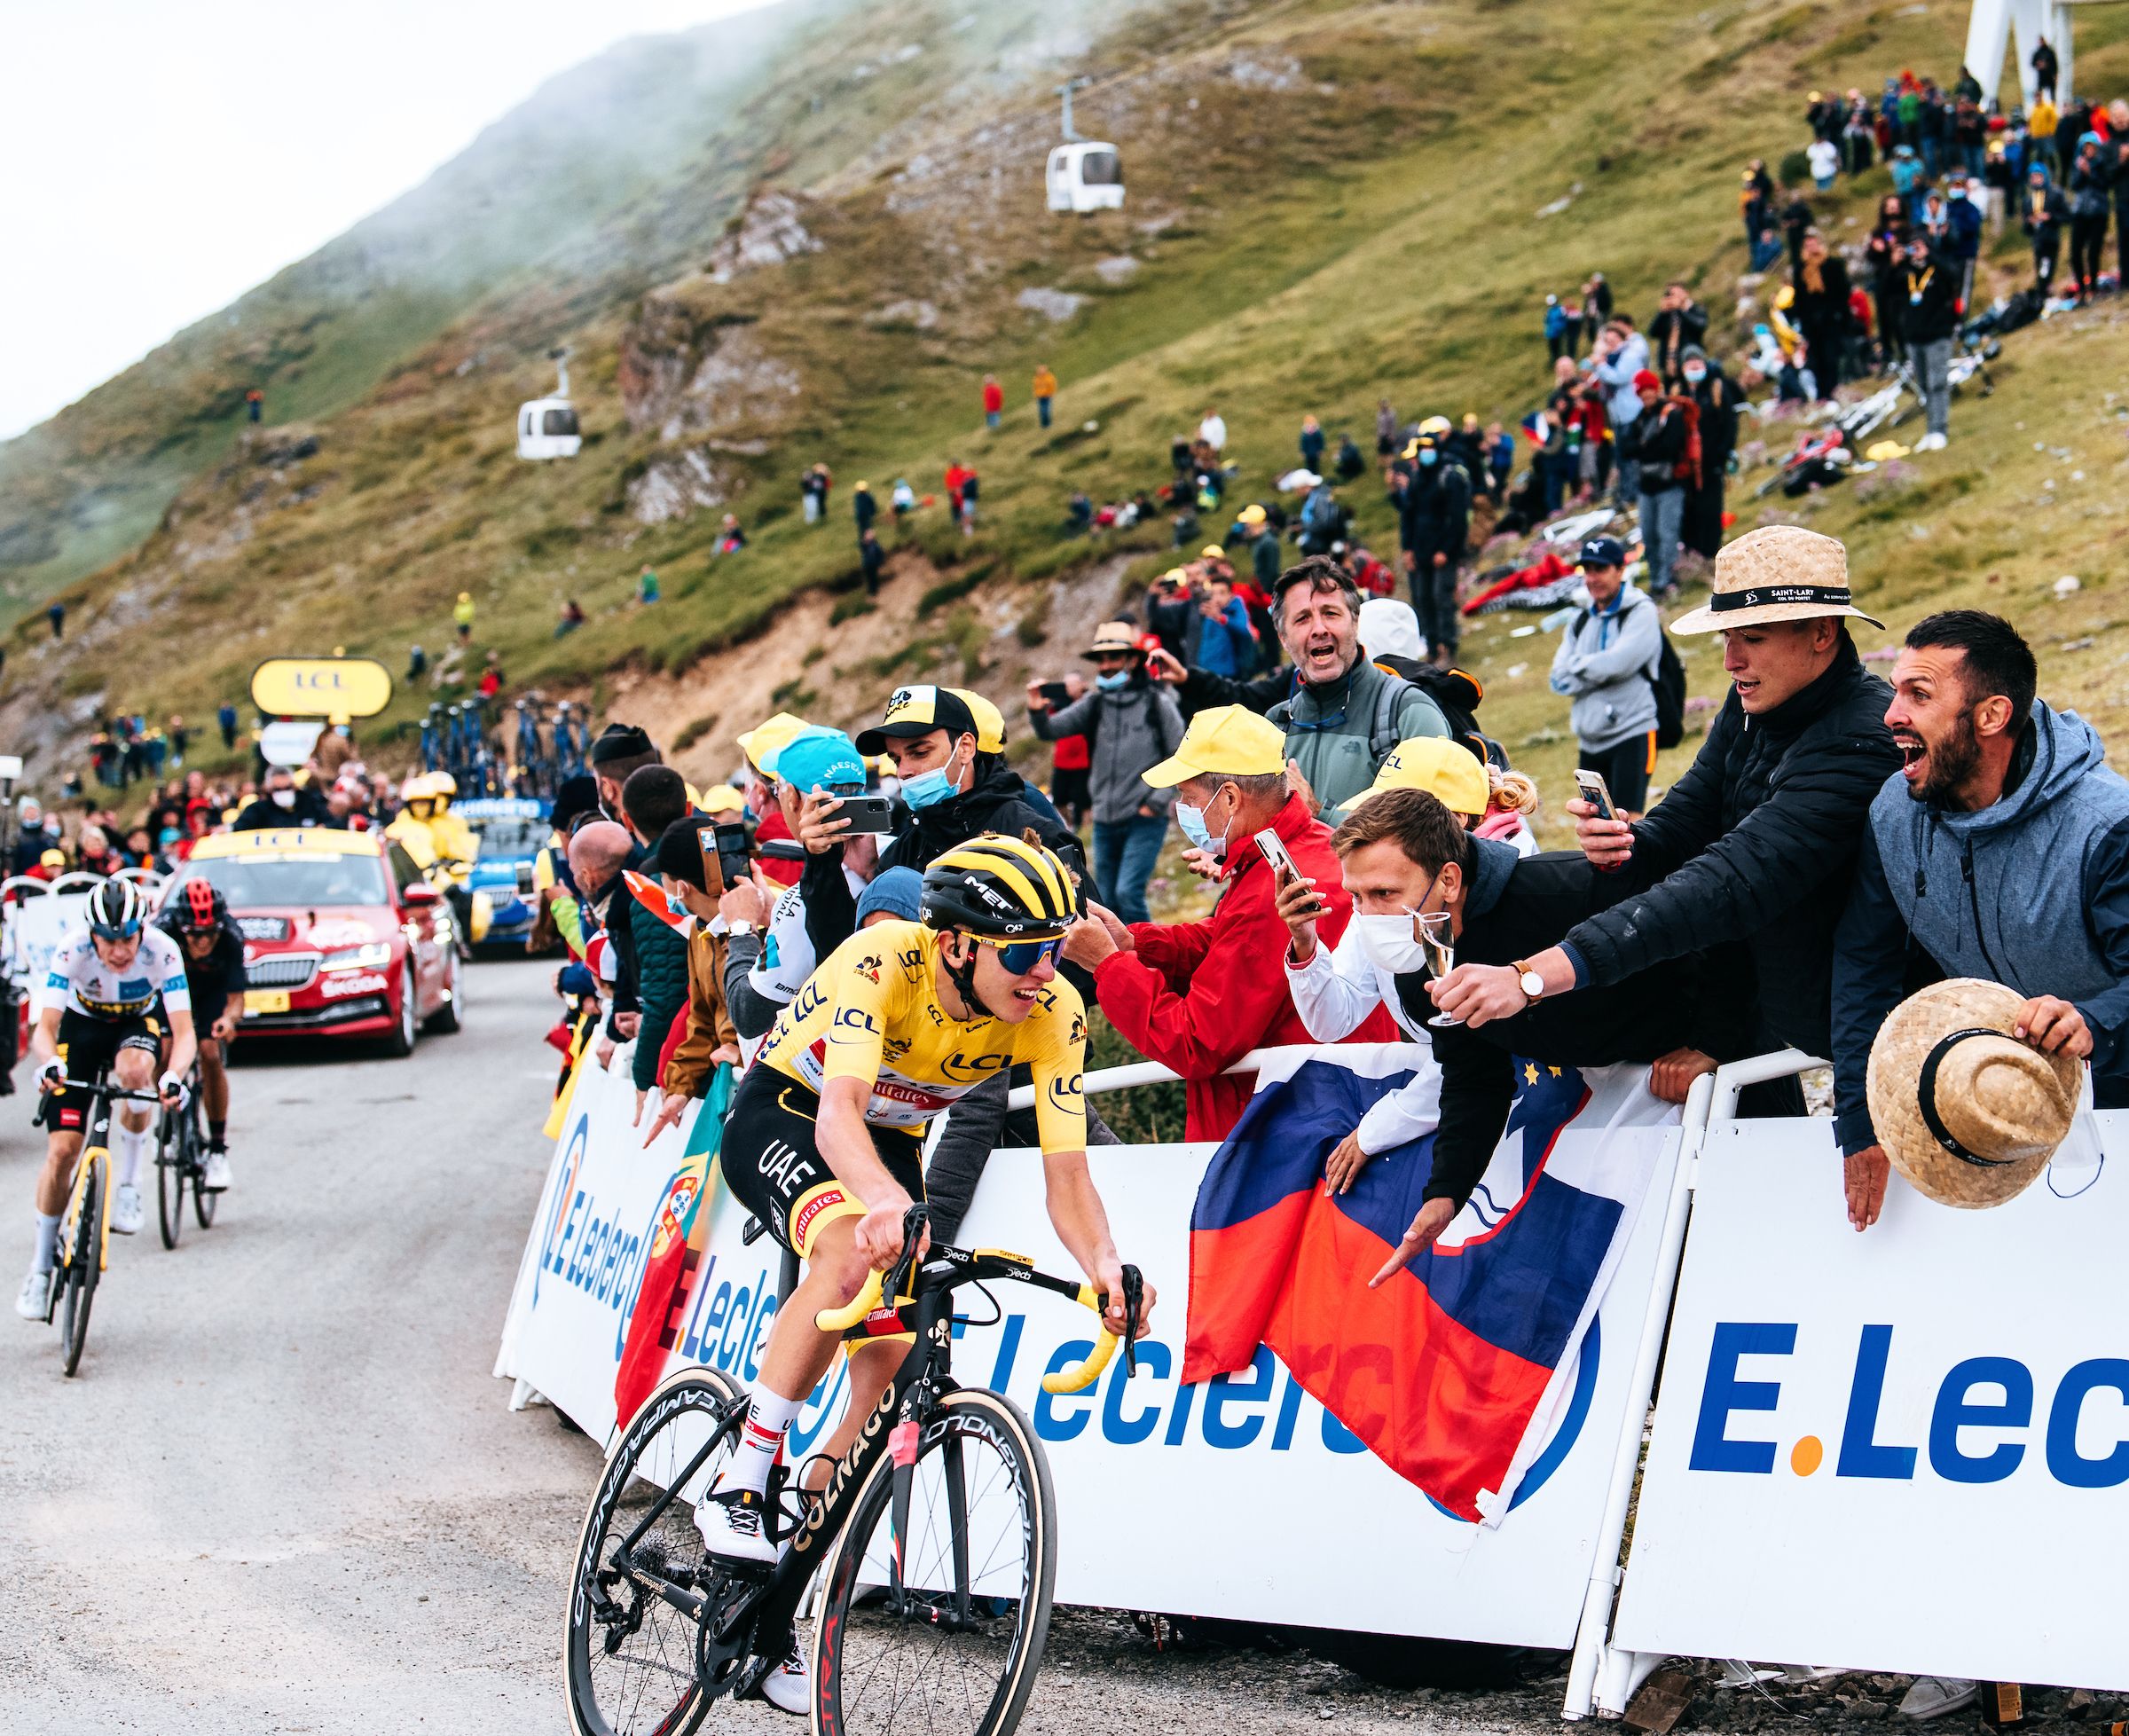 Pogačar drops Jonas Vingegaard and Richard Carapaz in the final stretch of the Col du Portet to win Stage 17 of the 2021 Tour.